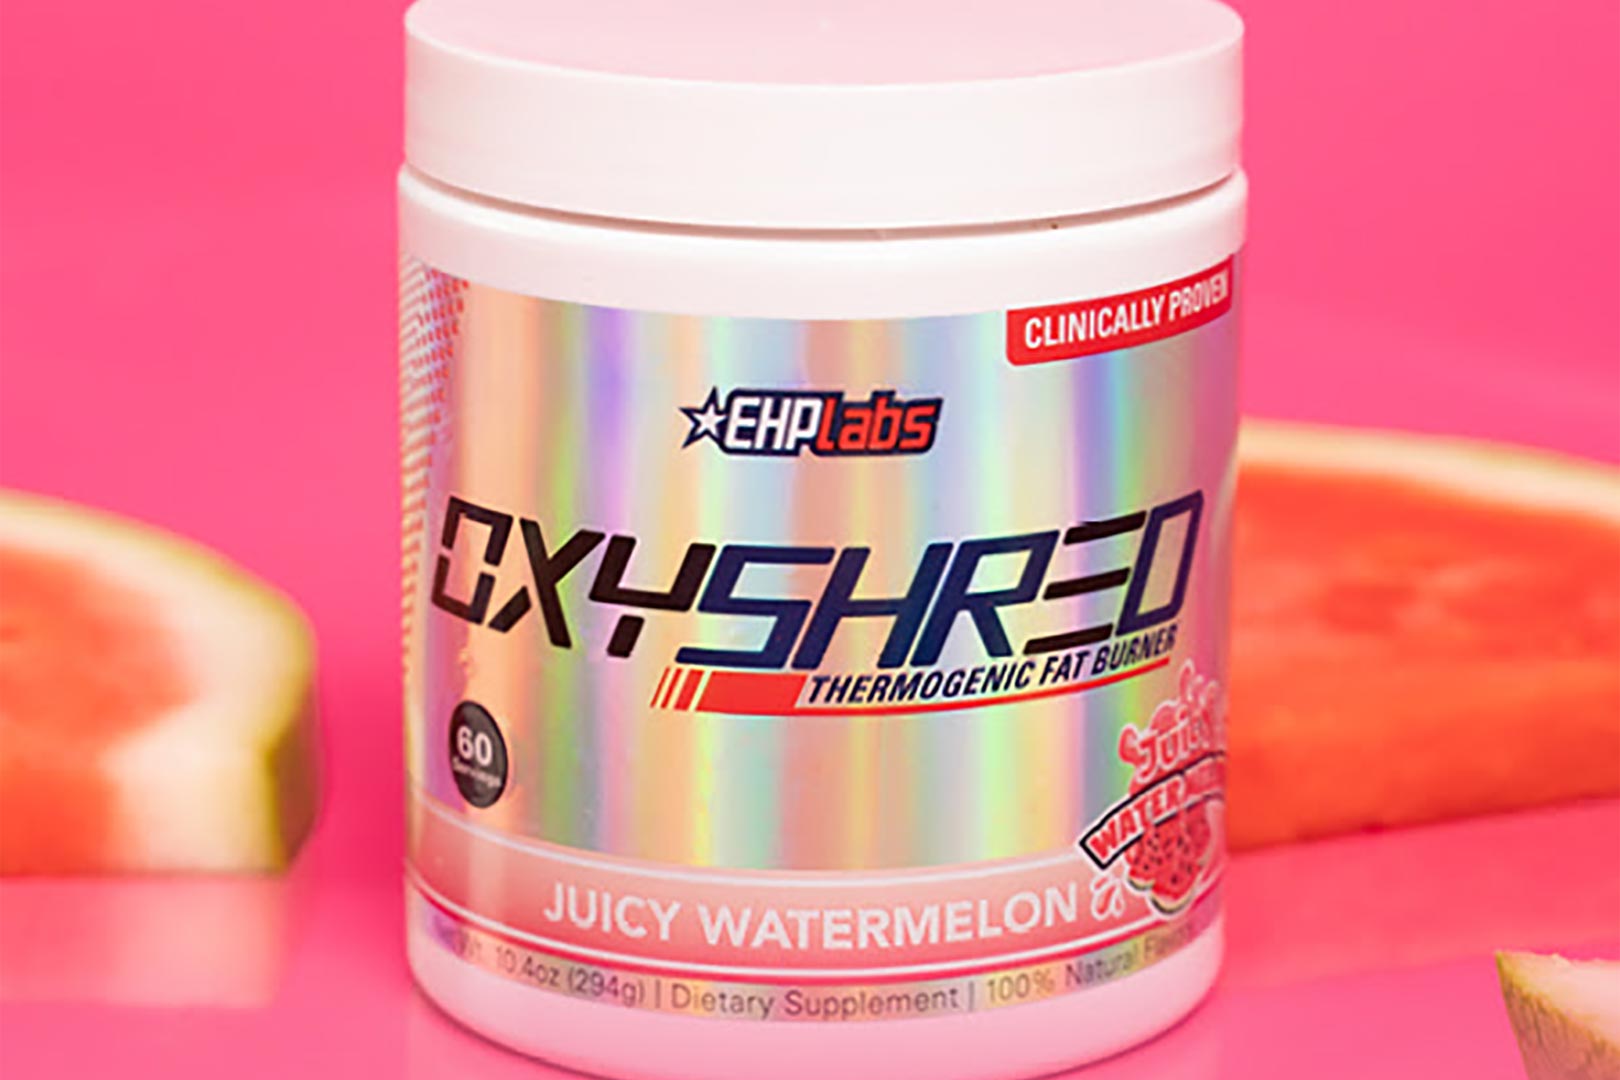 Ehp Labs Juicy Watermelon Oxyshred